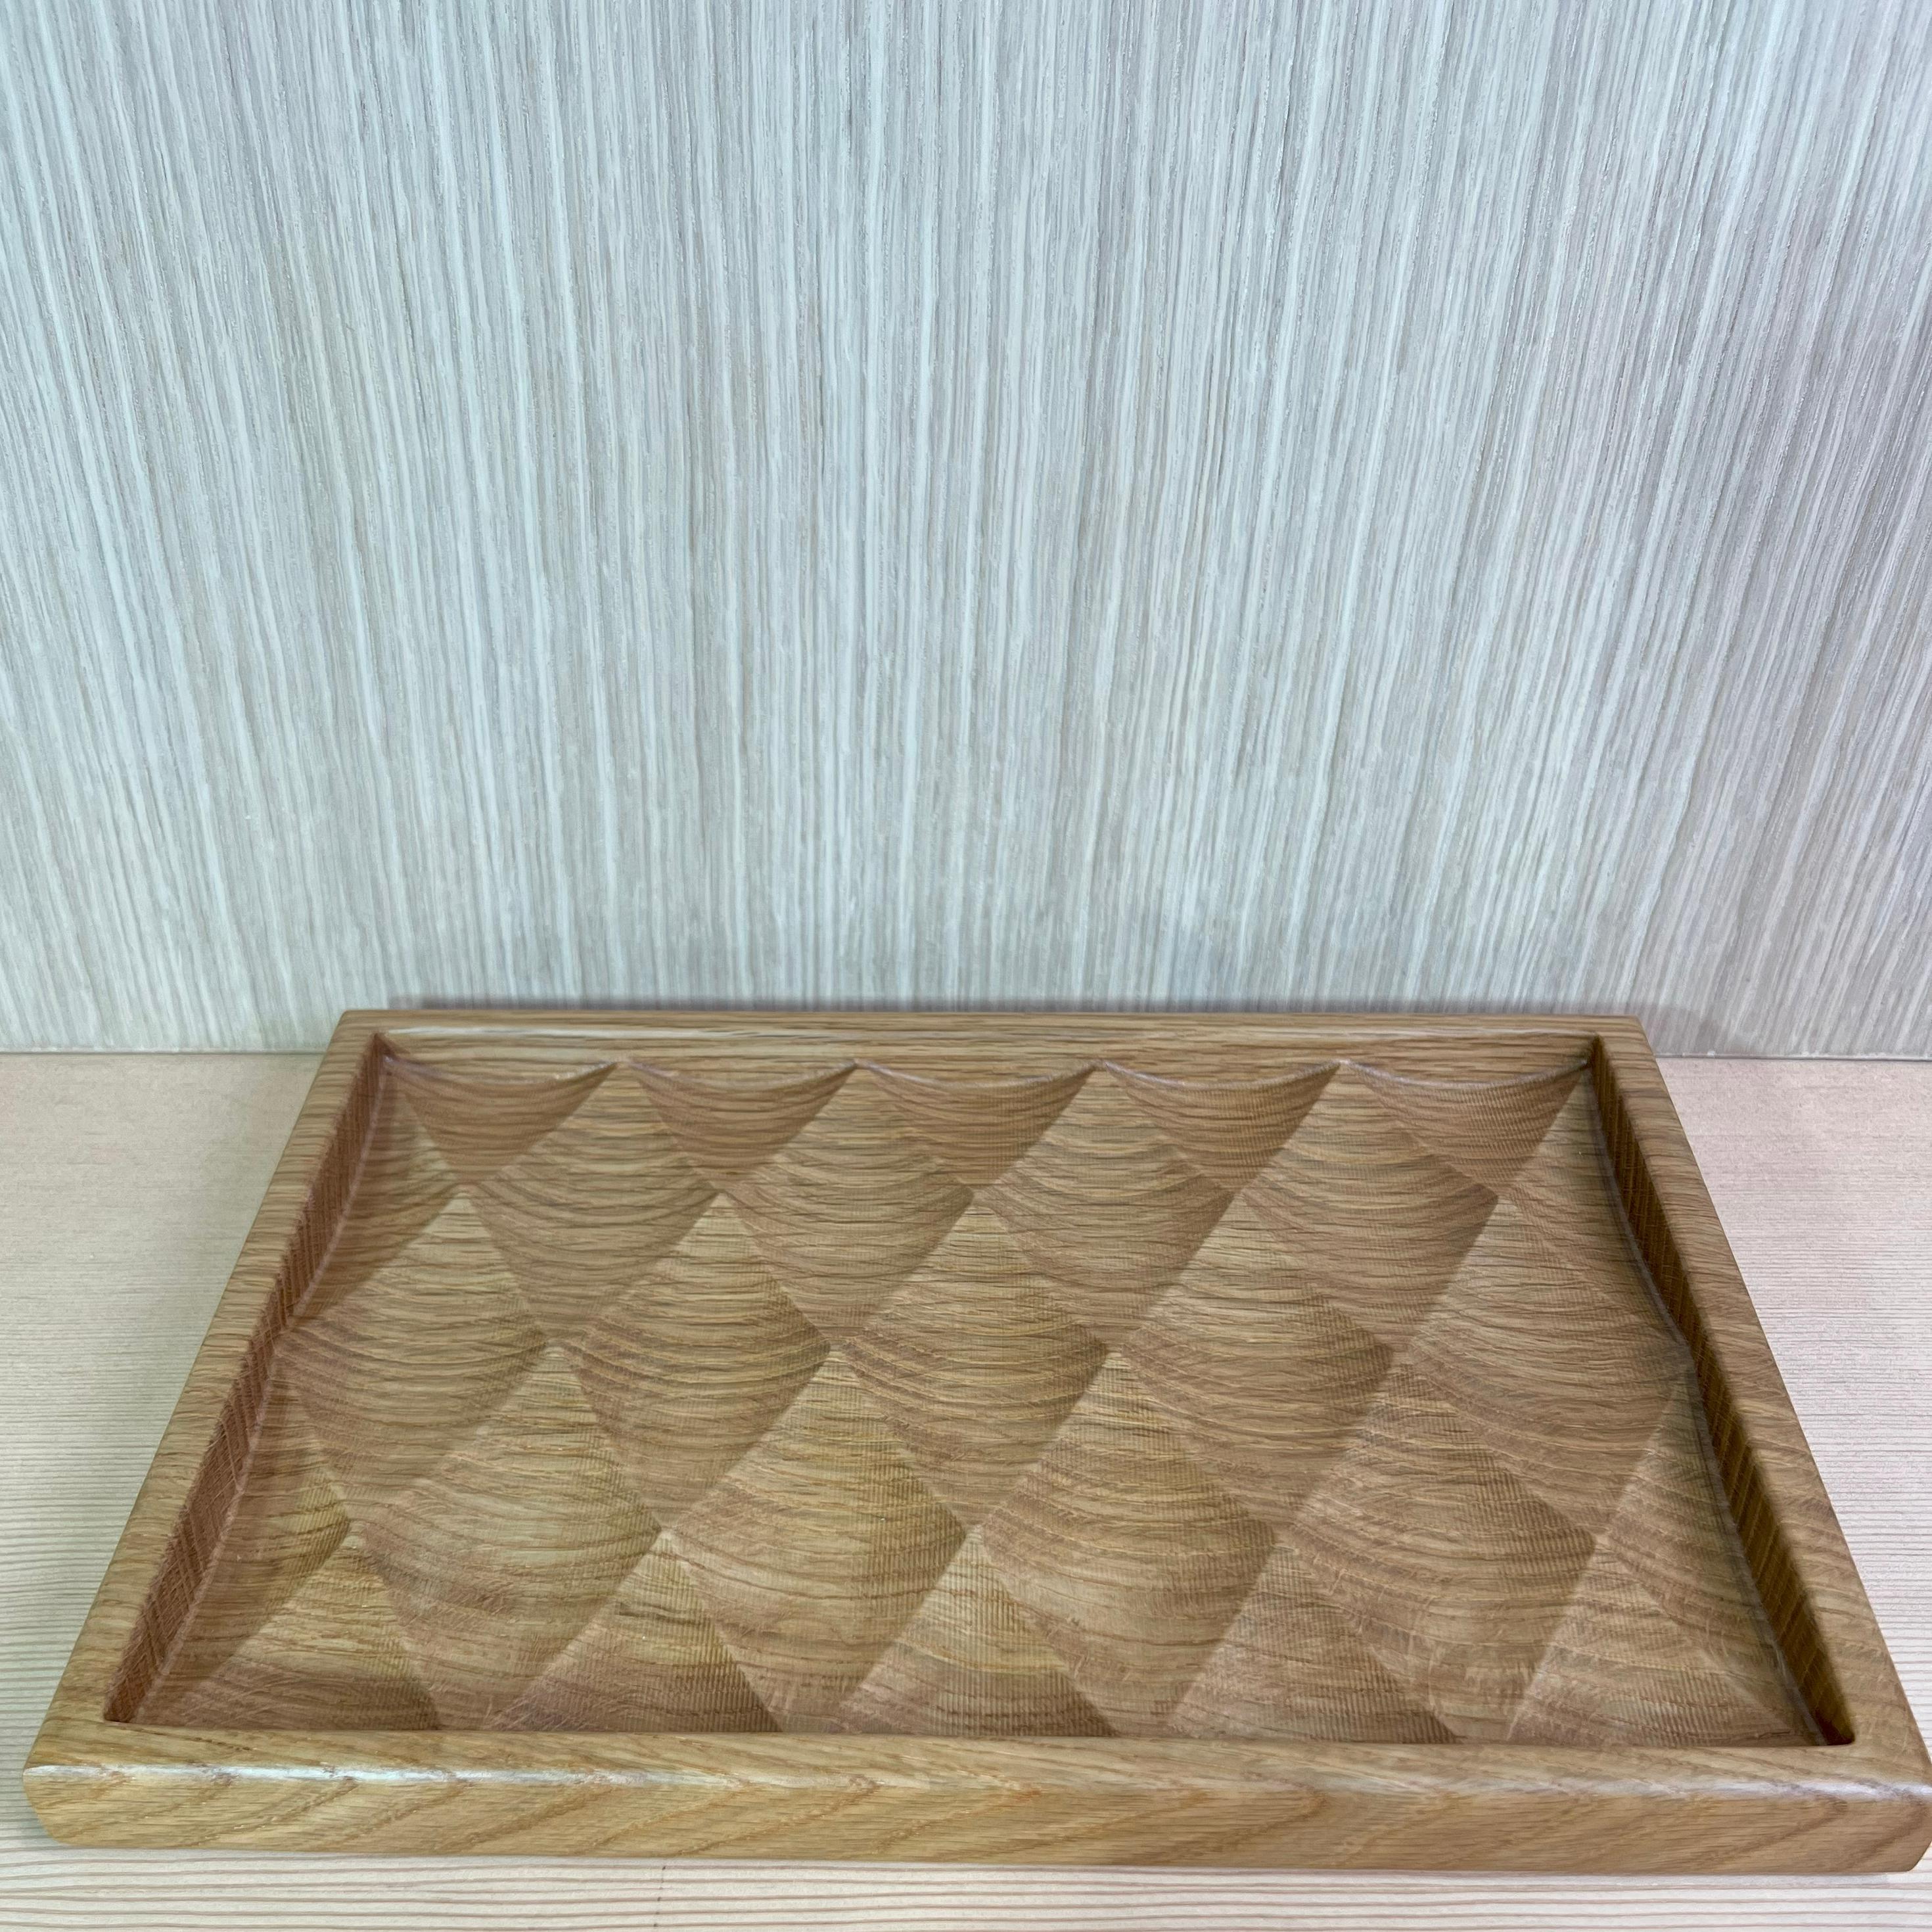 This elegant artisan tray made from top quality solid white oak wood. This piece was designed and created with extreme valleys and peaks to capture morning, afternoon and evening light. The lighting casts shadows and patterns that I have found